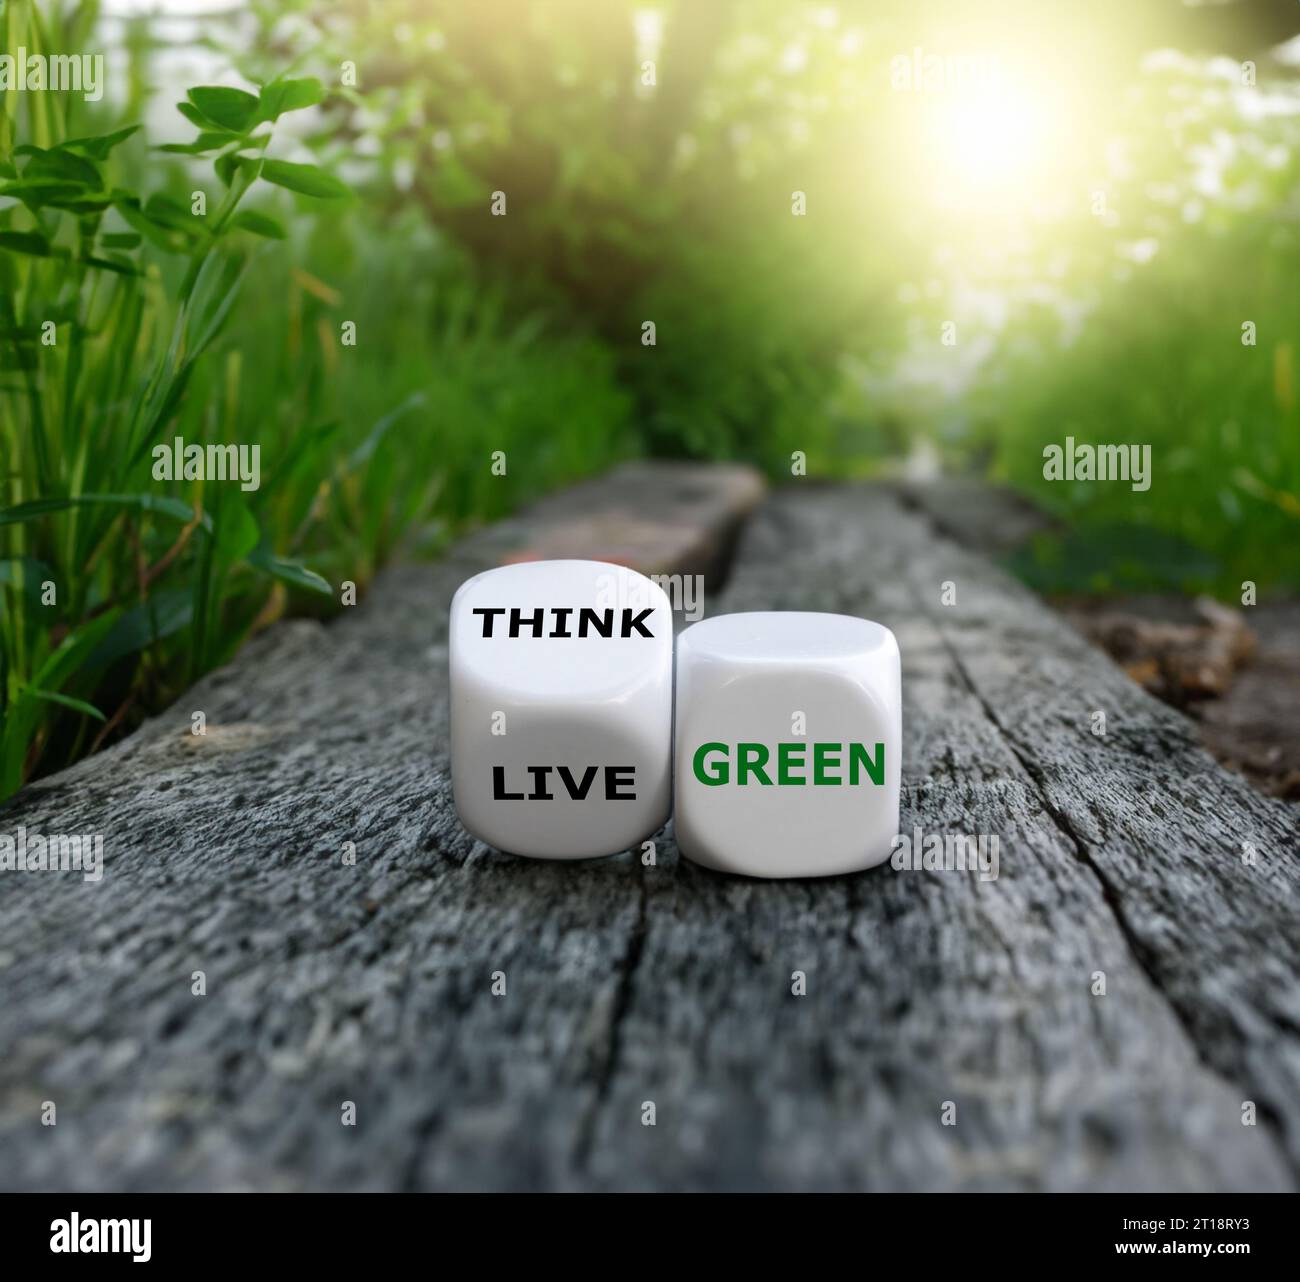 Dice form the expression 'think green' and 'live green'. Stock Photo